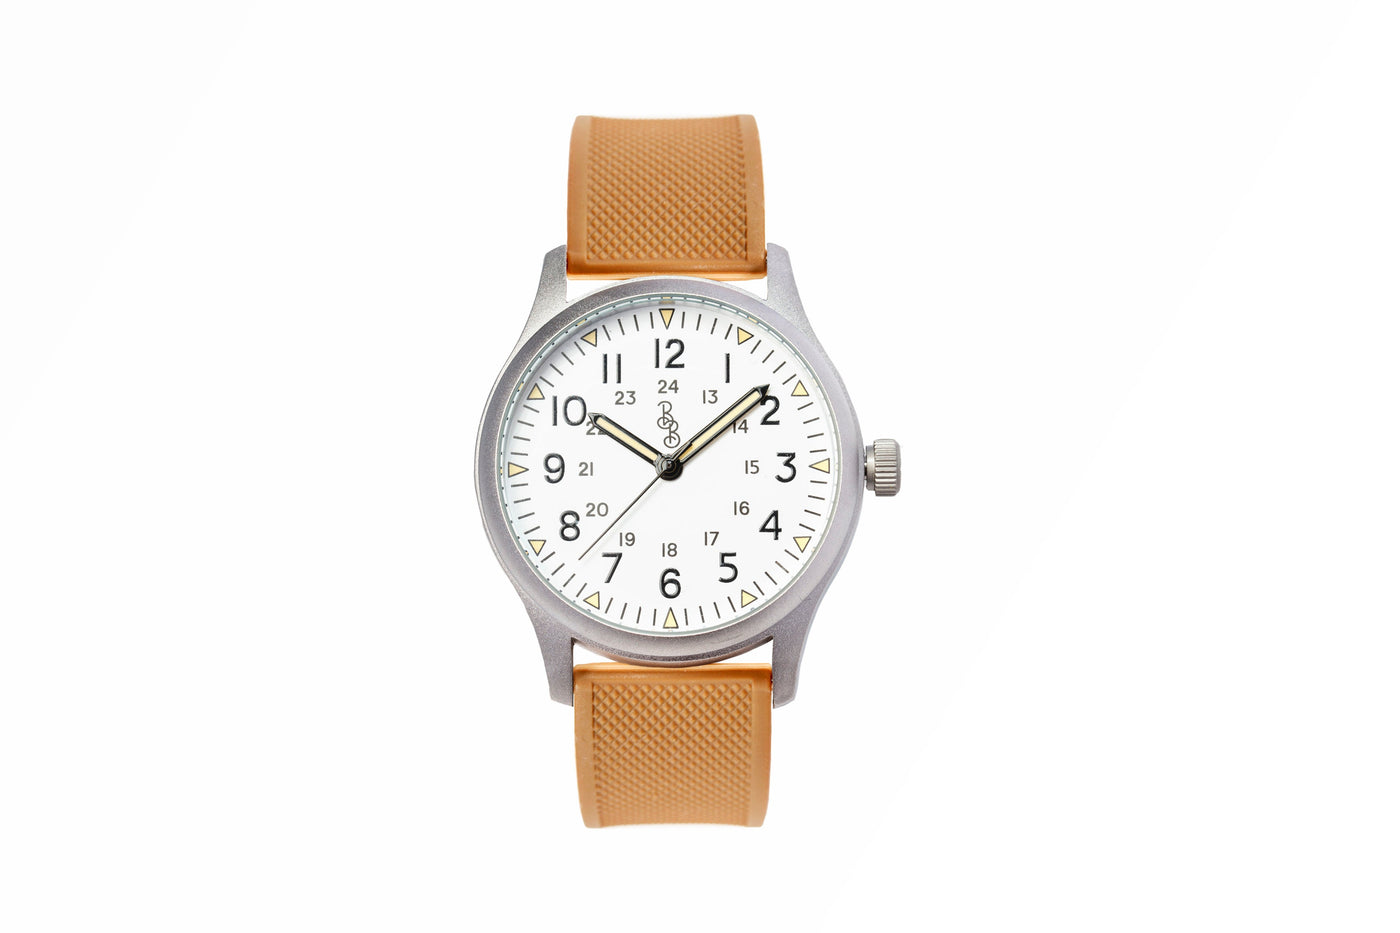 The Beyond Boring Watch Company 40mm White Field